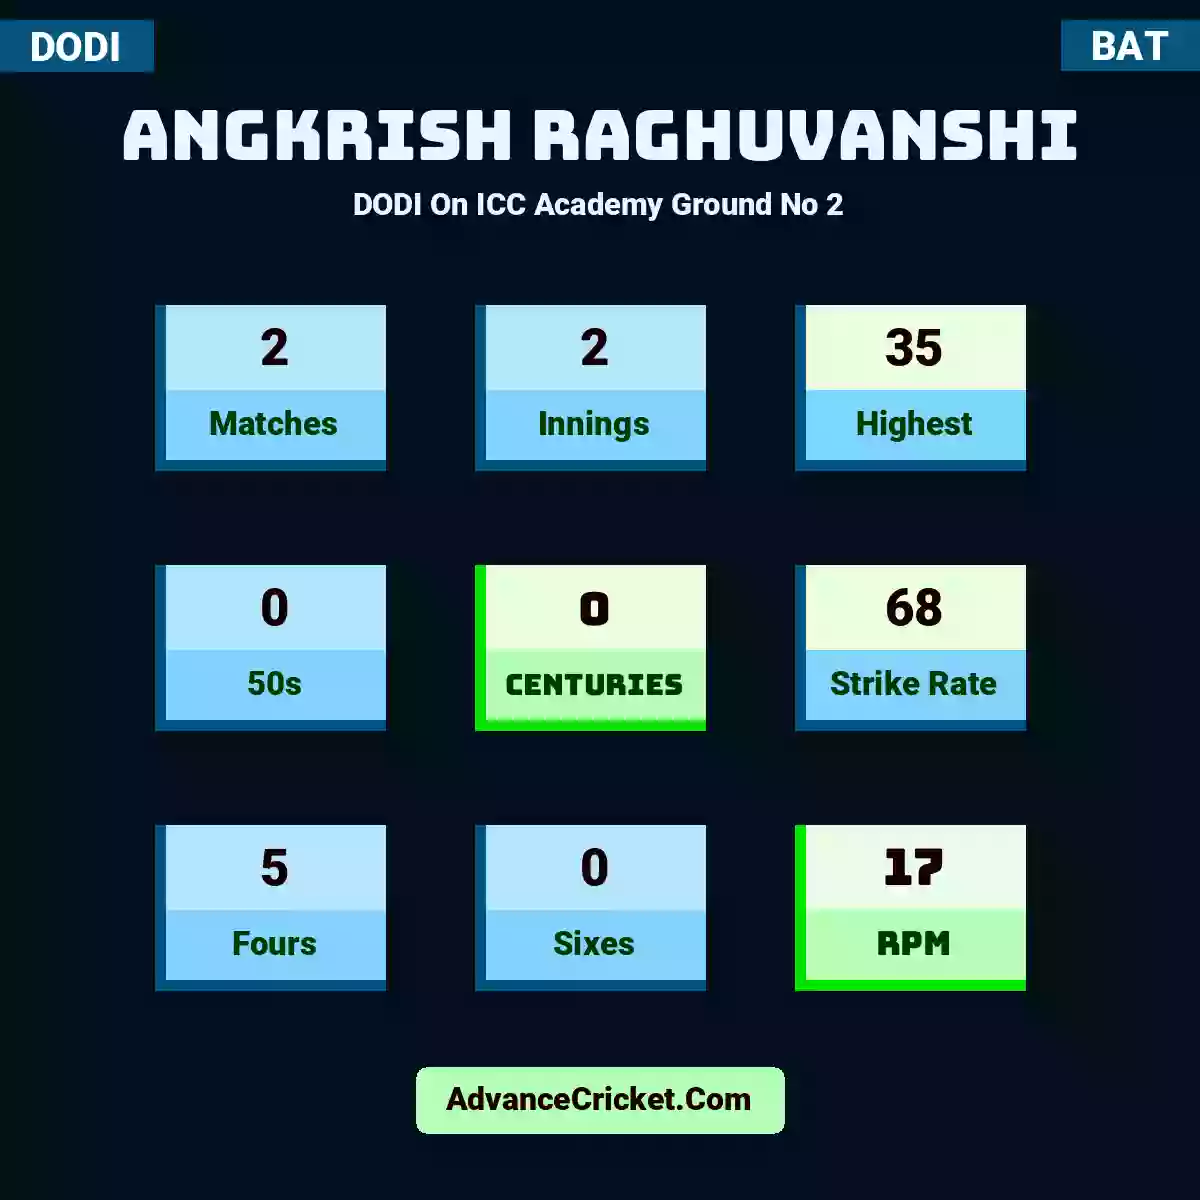 Angkrish Raghuvanshi DODI  On ICC Academy Ground No 2, Angkrish Raghuvanshi played 2 matches, scored 35 runs as highest, 0 half-centuries, and 0 centuries, with a strike rate of 68. A.Raghuvanshi hit 5 fours and 0 sixes, with an RPM of 17.